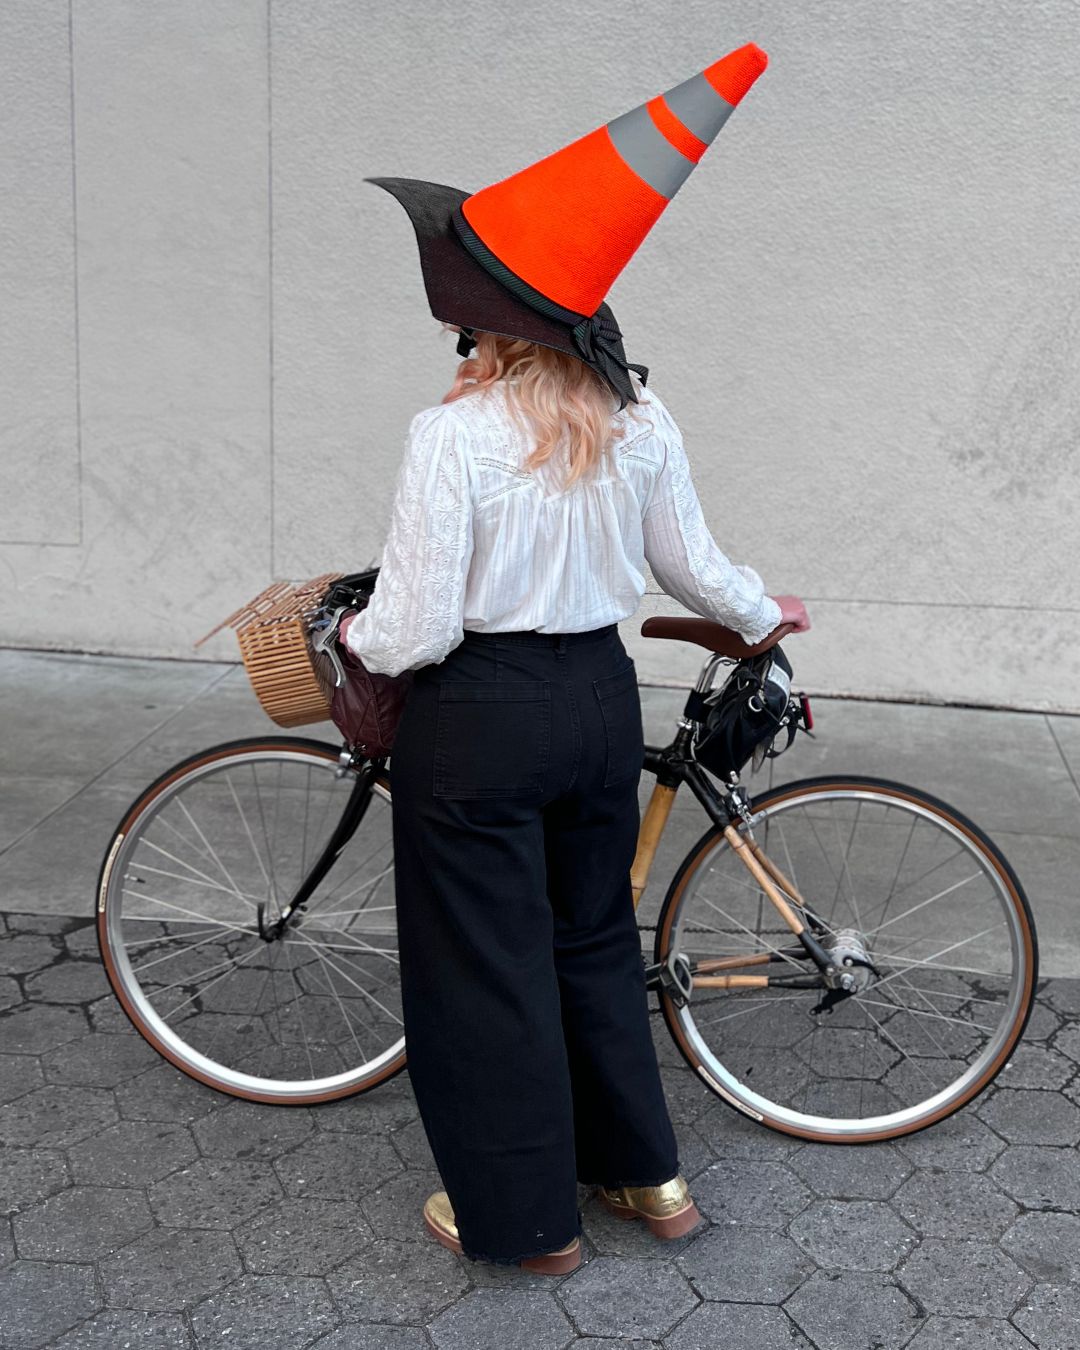 A woman with blonde hair, captured from behind as she strolls beside a weathered white wall, guides her bicycle by her side. She dons an eye-catching bicycle helmet, uniquely covered to mimic the appearance of a fluorescent orange traffic cone, adding a whimsical yet safety-conscious vibe to the scene.